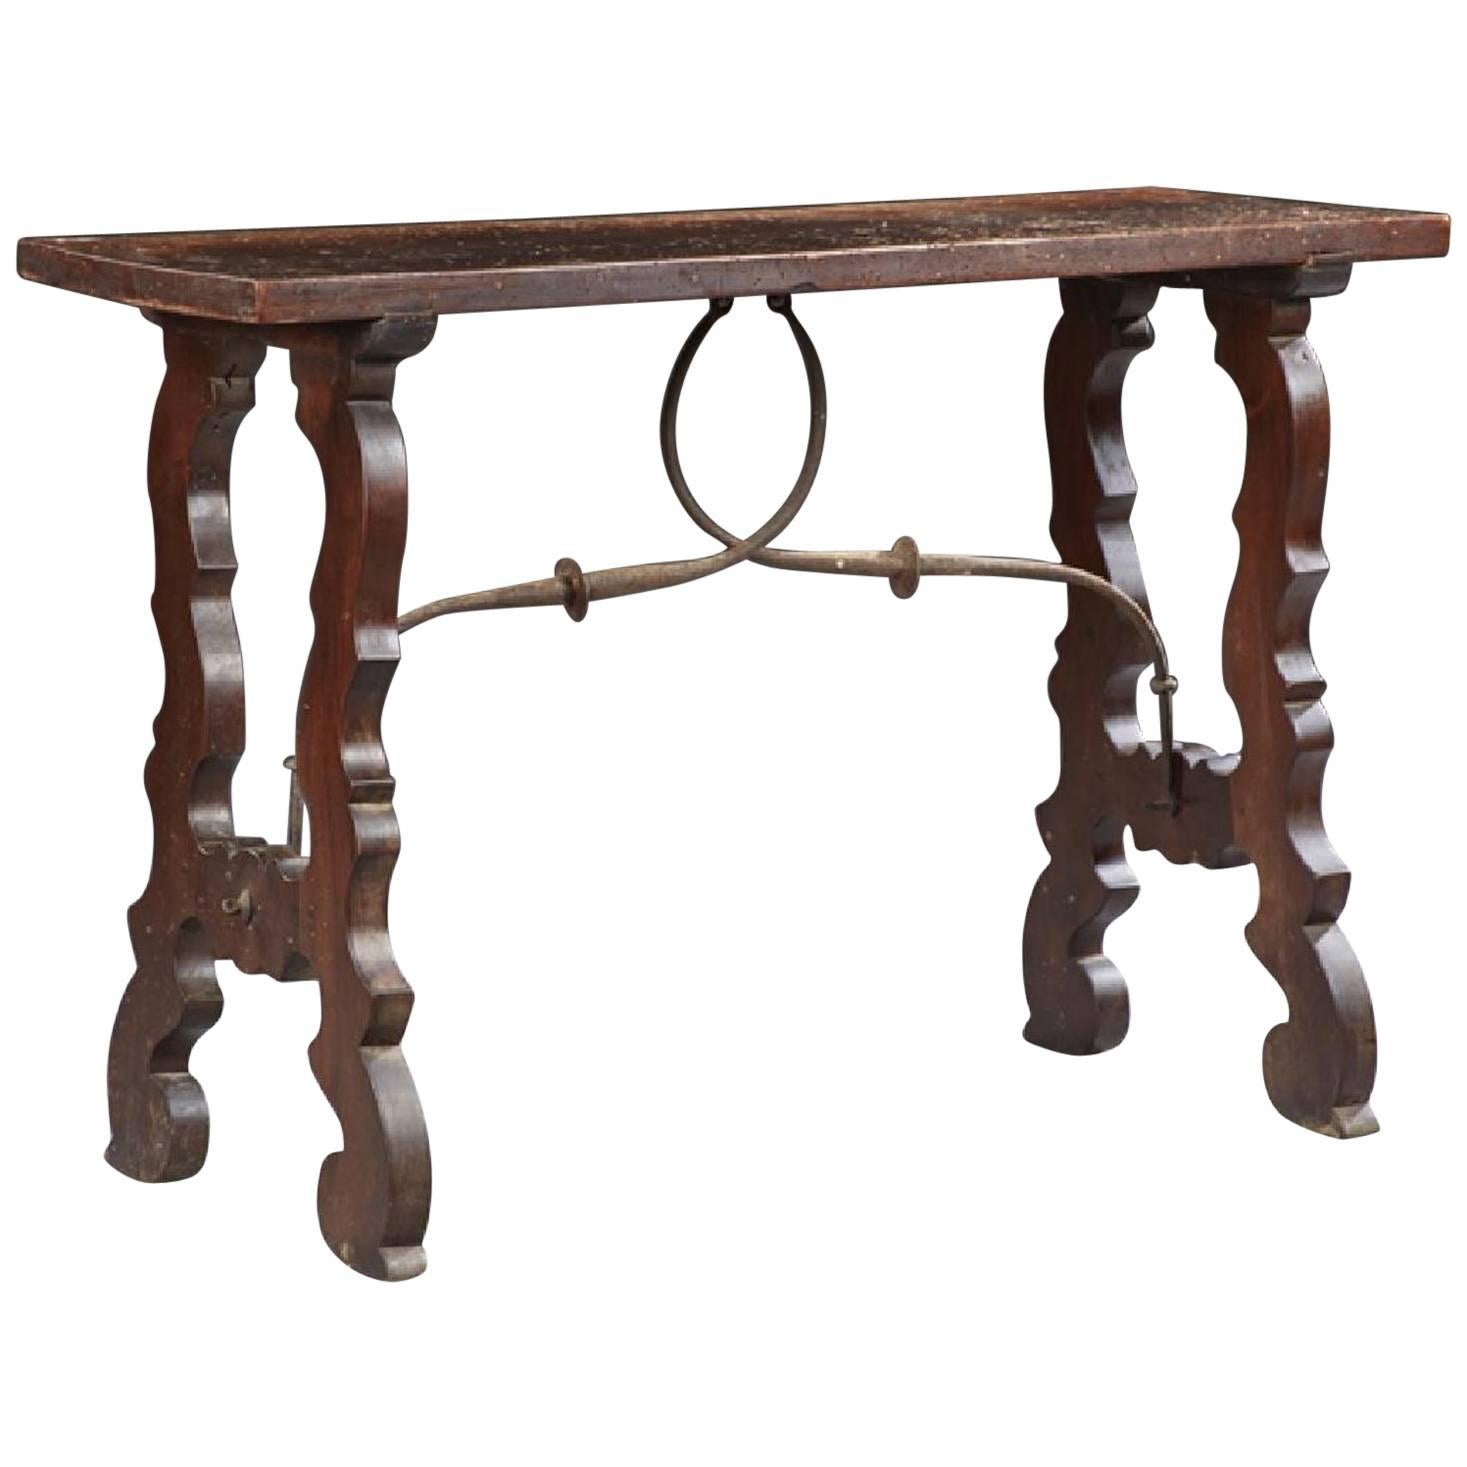 Spanish Carved Walnut Console Table with Iron Stretchers, 19th Century